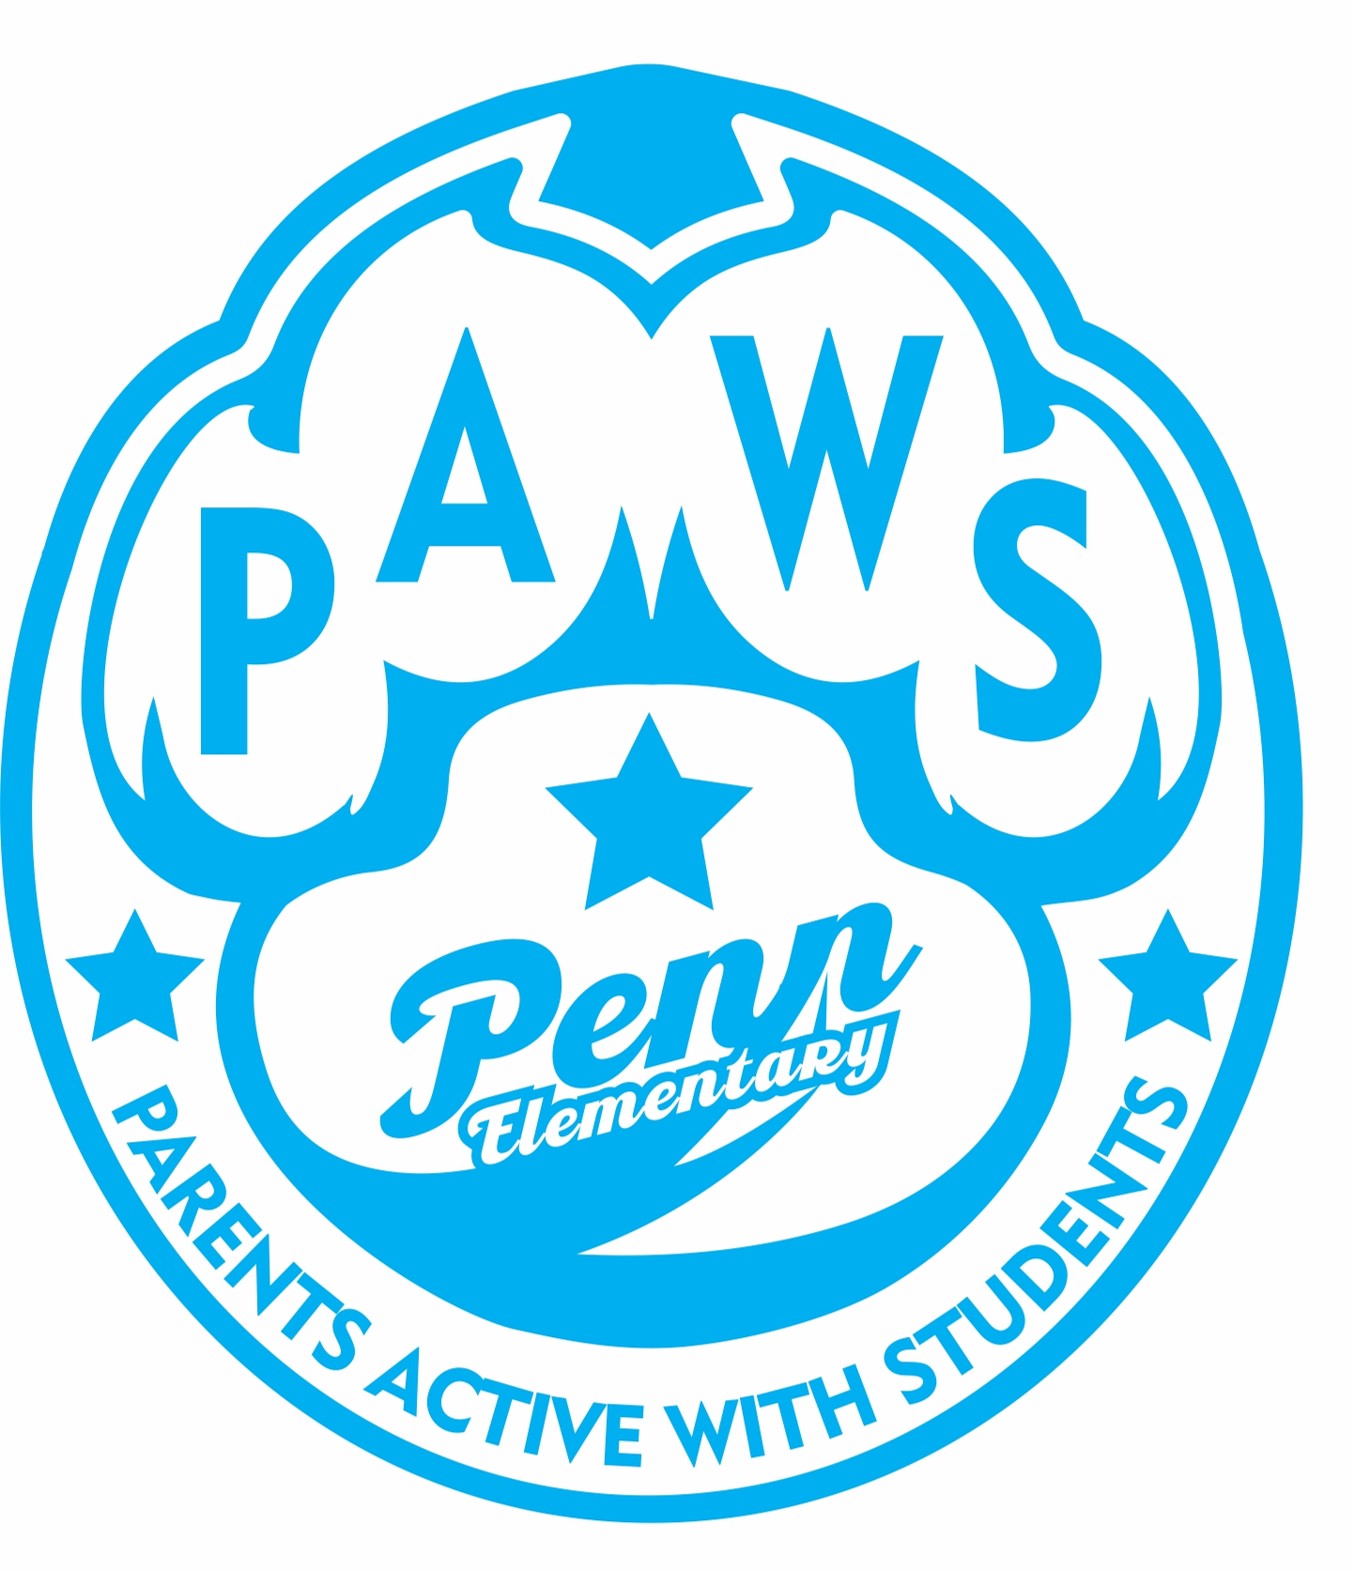 paws_parents active with students.jpg